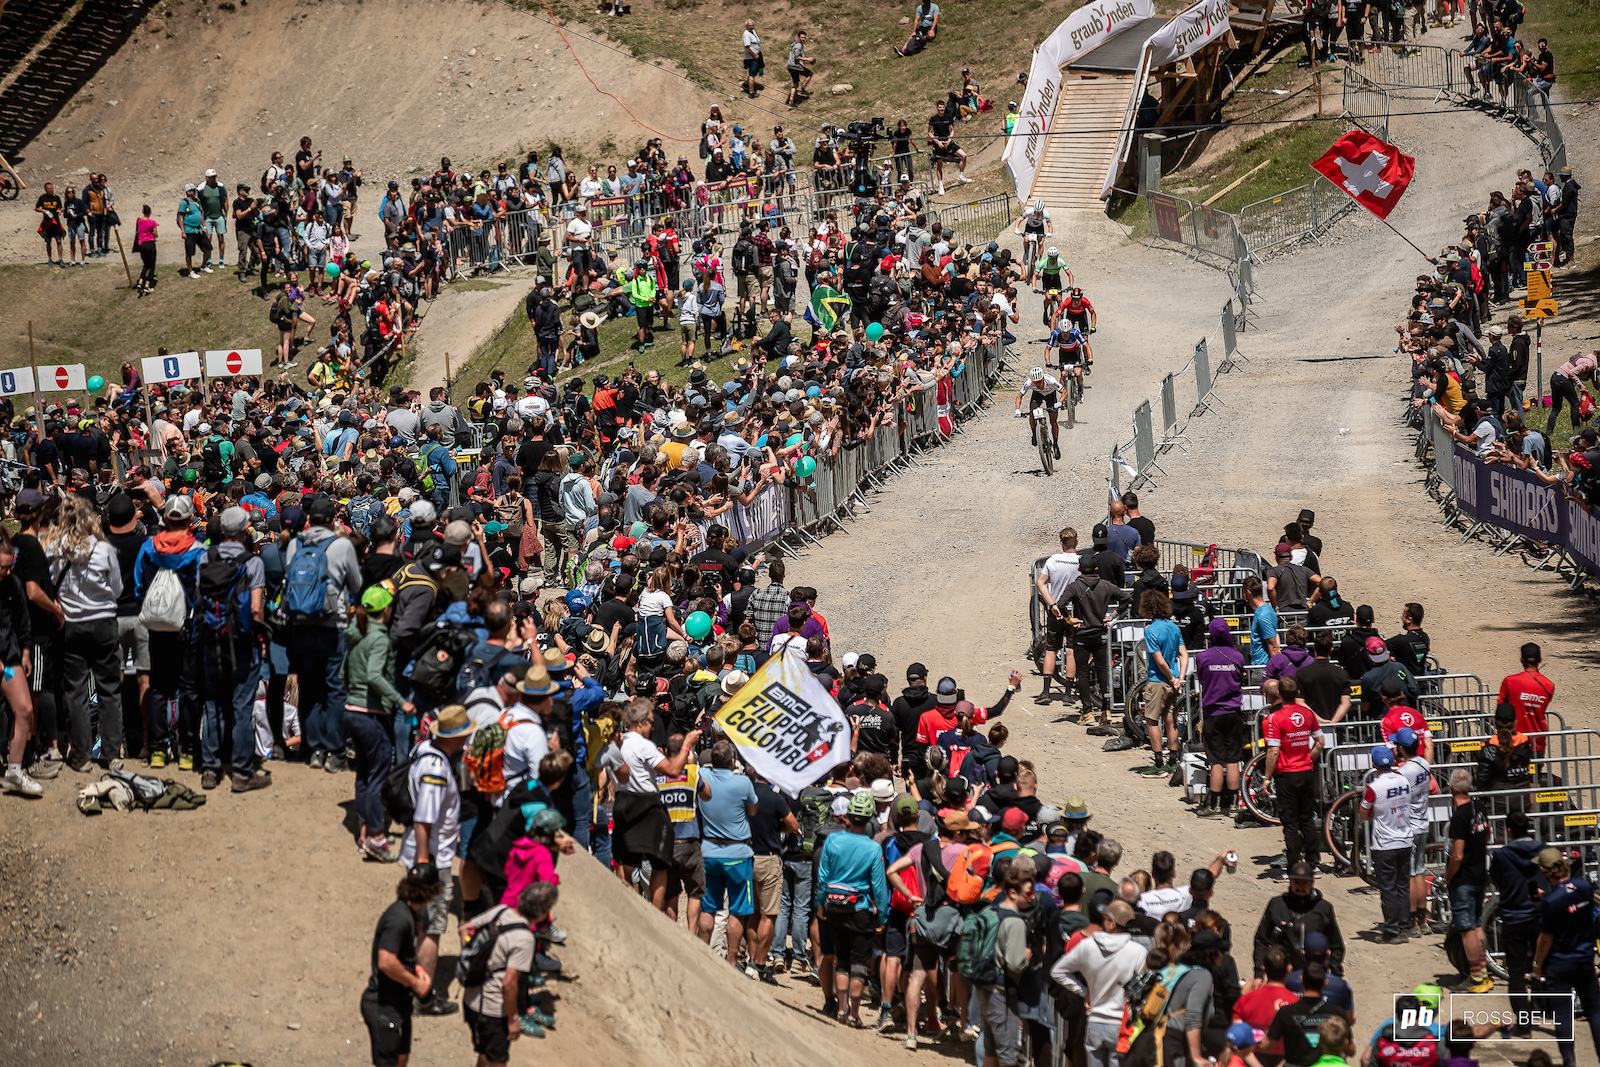 Nino Schurter showed exactly how he wanted to play it early on.